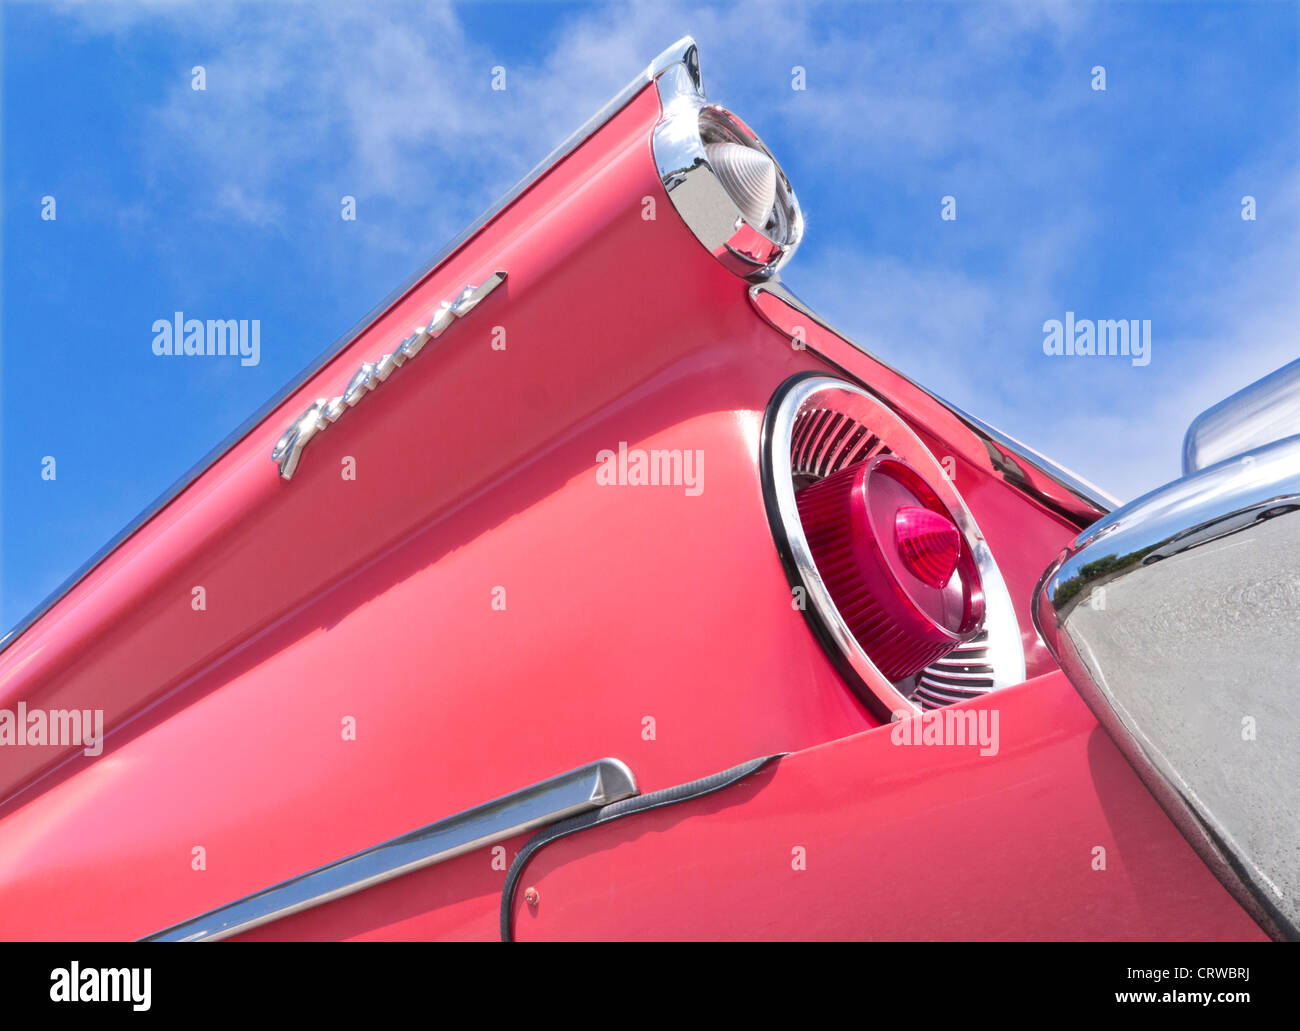 Graphic view of extravagant style statement tail fin on 1950's Ford Fairlane 500 Skyliner America classic motor car Stock Photo